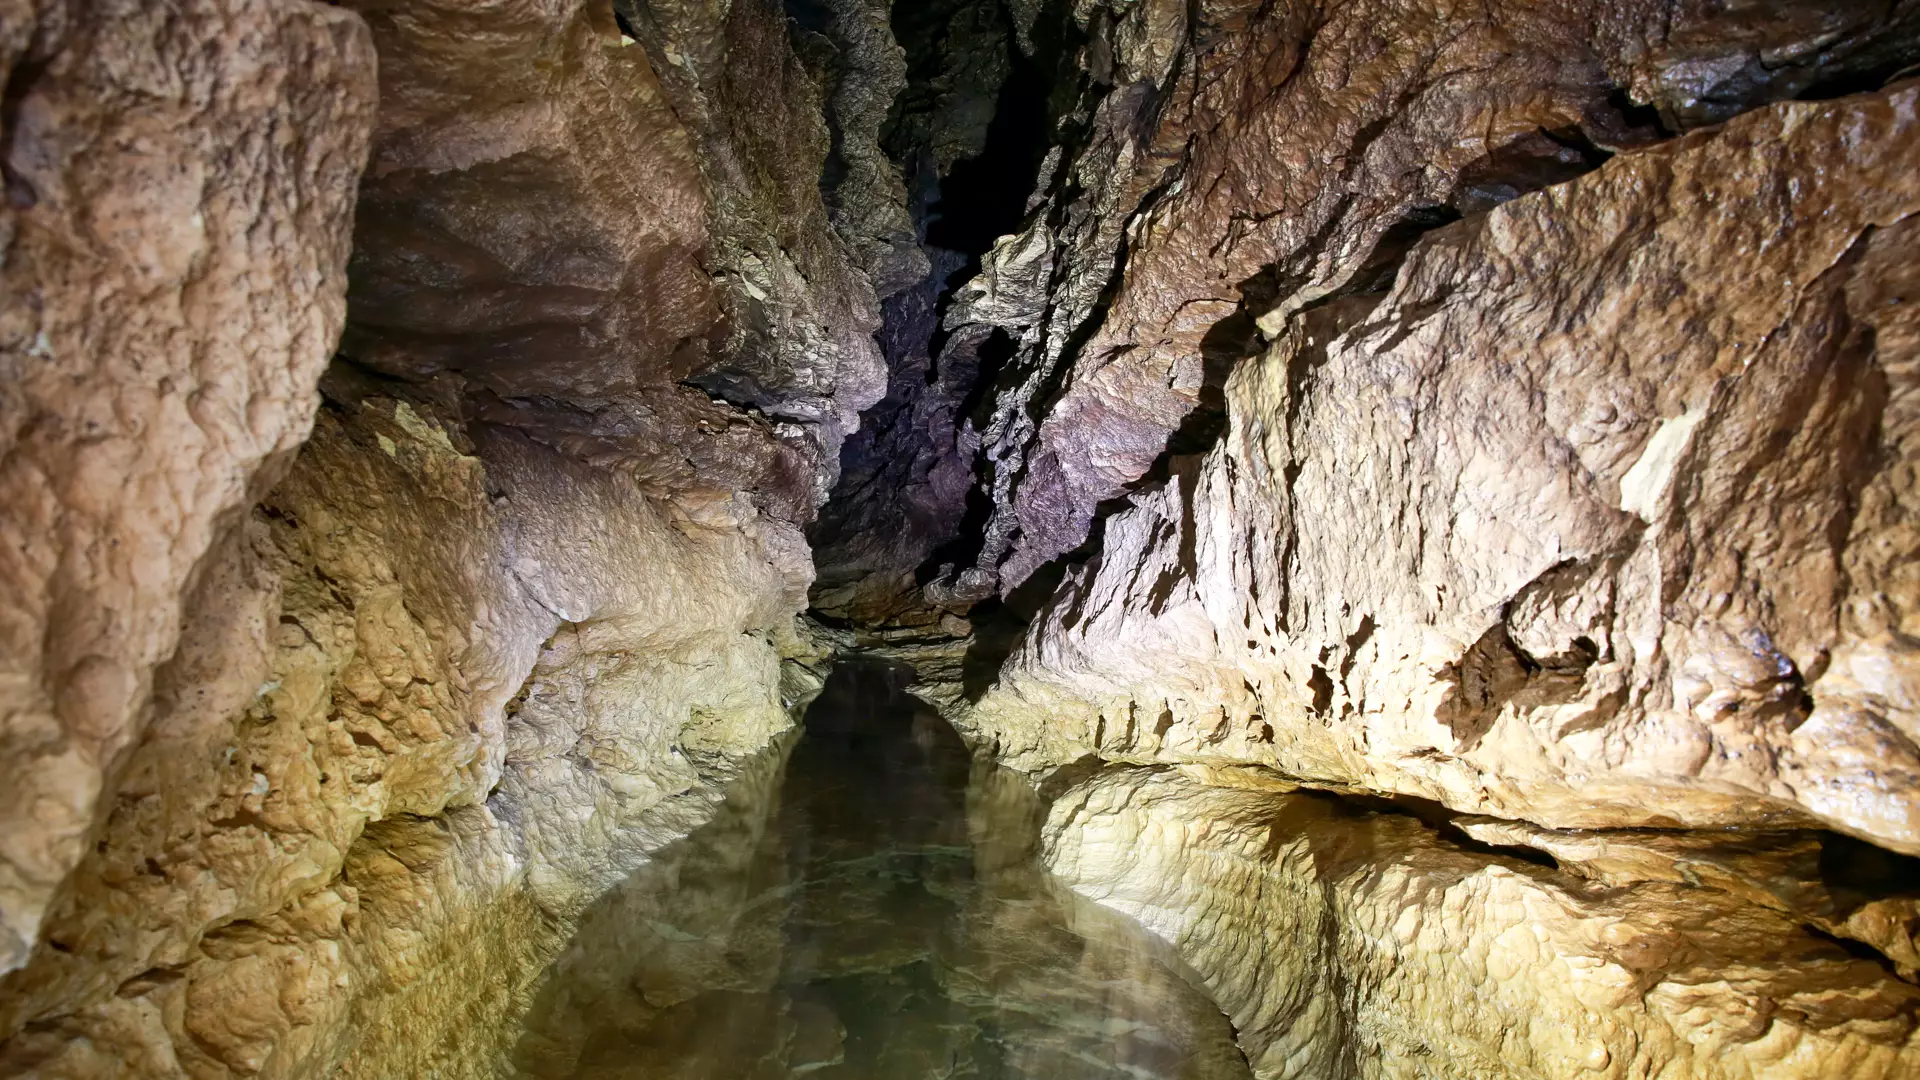 Melouri Cave Natural Monument – An Outstanding Natural Monument of the Imereti Region